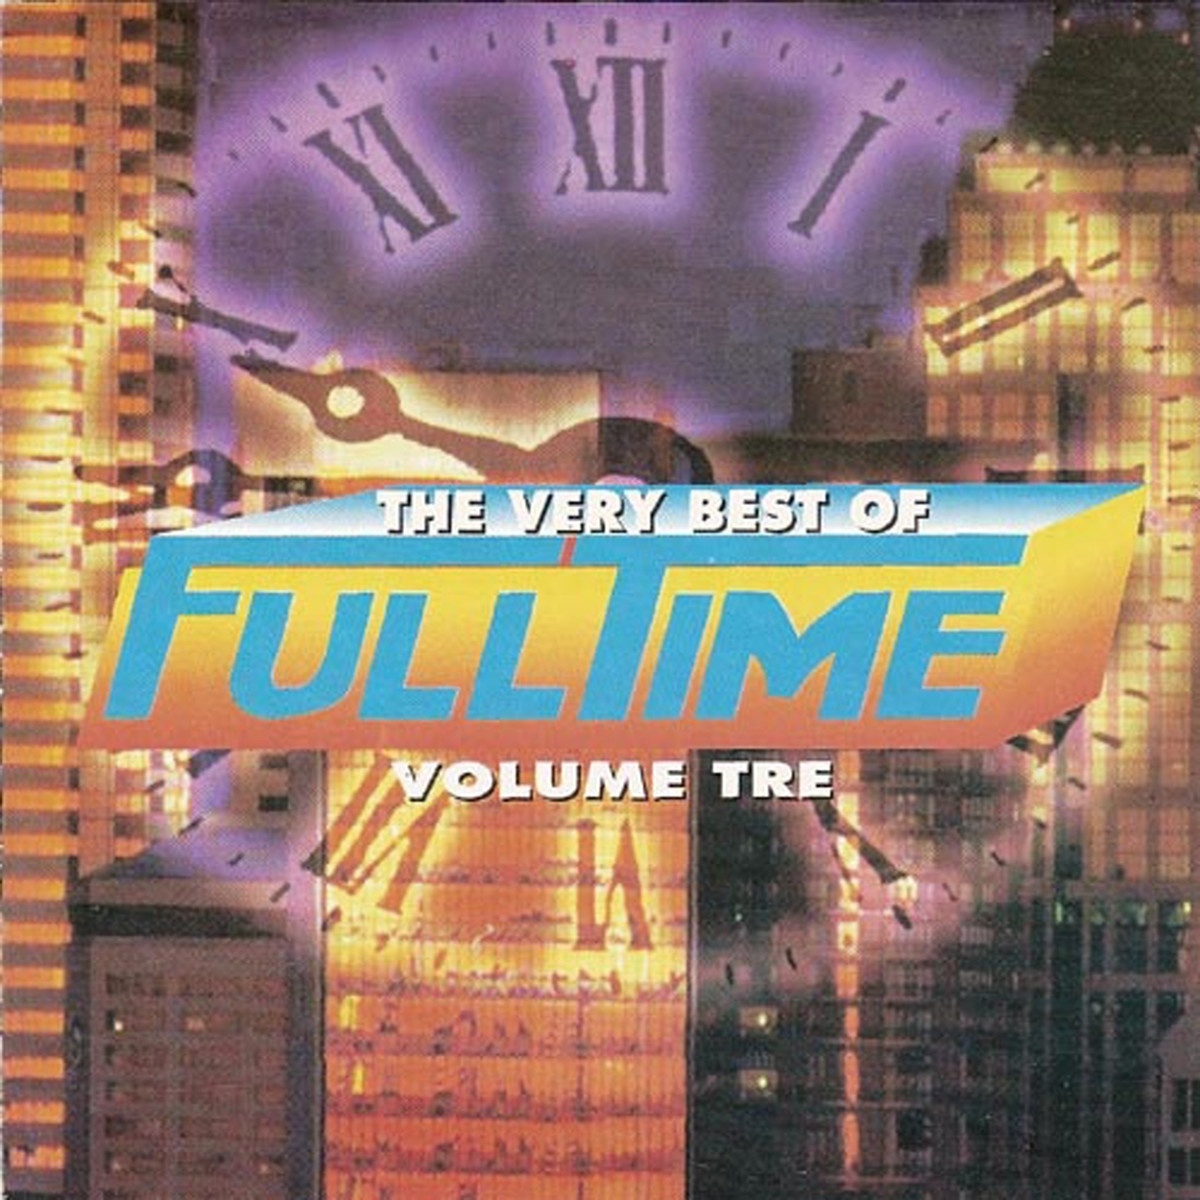 The Very Best of Full Time, Vol. 3